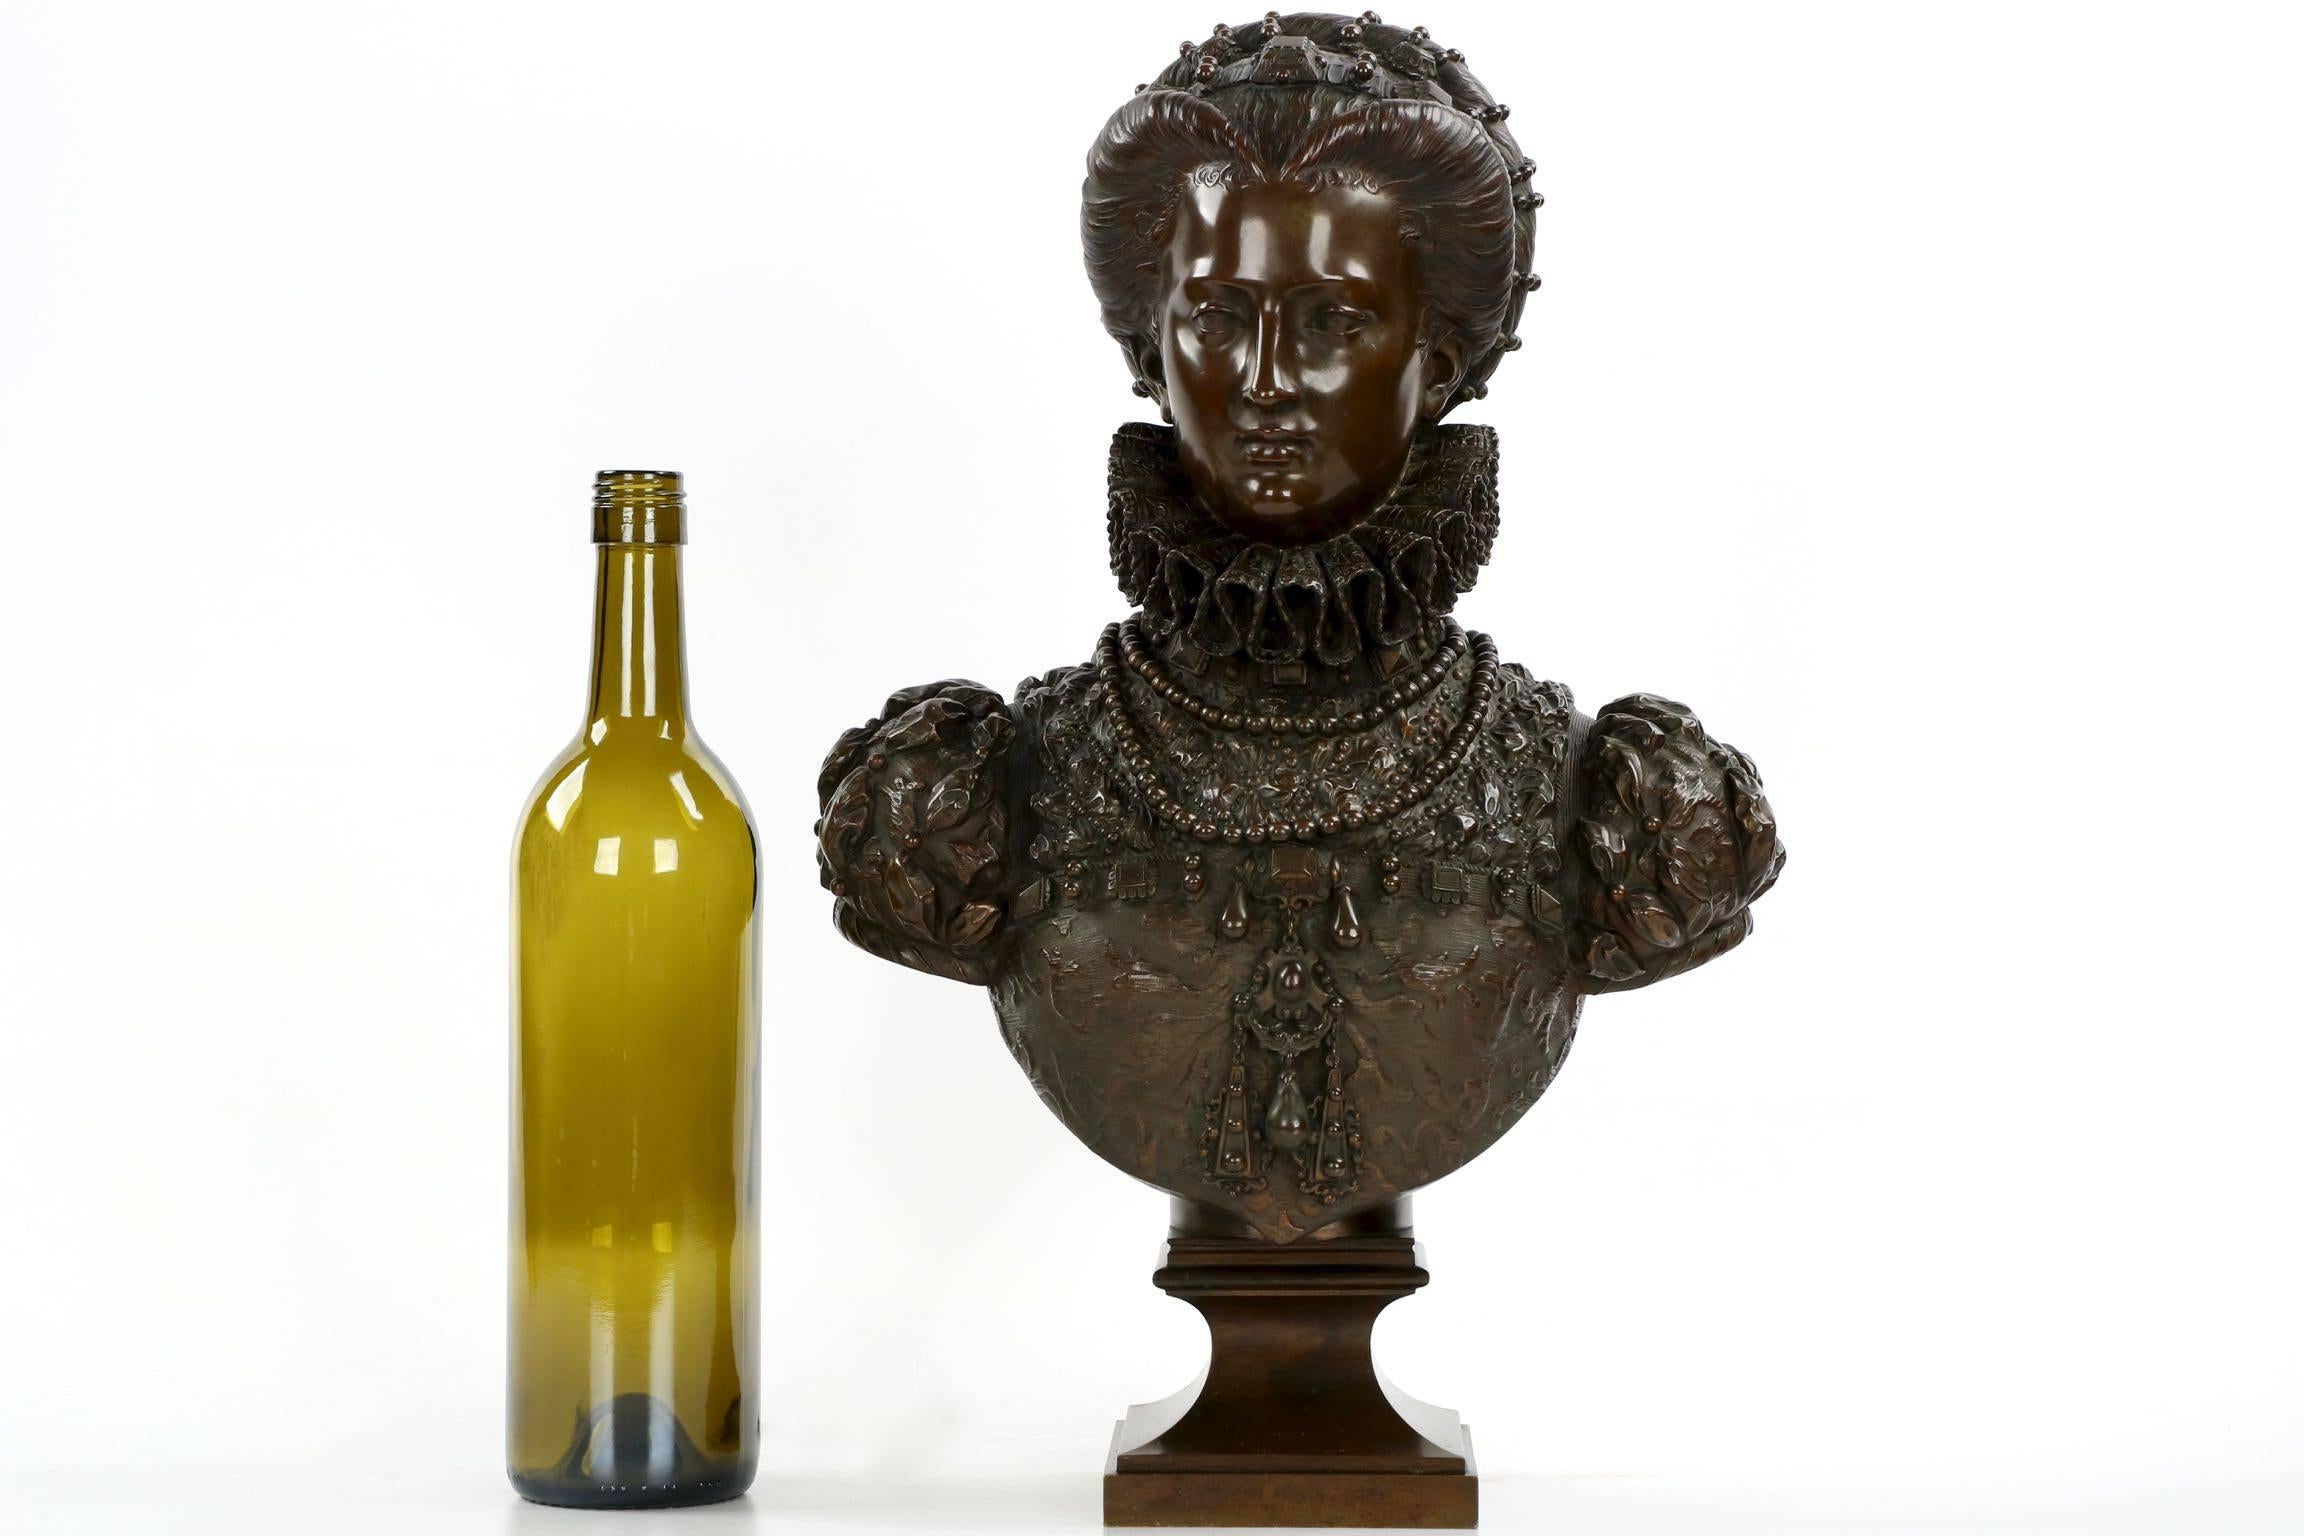 A powerful pair of Renaissance era figures modeled after the cast by Mathurin Moreau, the busts appear to represent Marie de Médici, Queen of France from 1600-1610, and Mary Queen of Scots, Queen consort of France from 1559-1560. There has also been